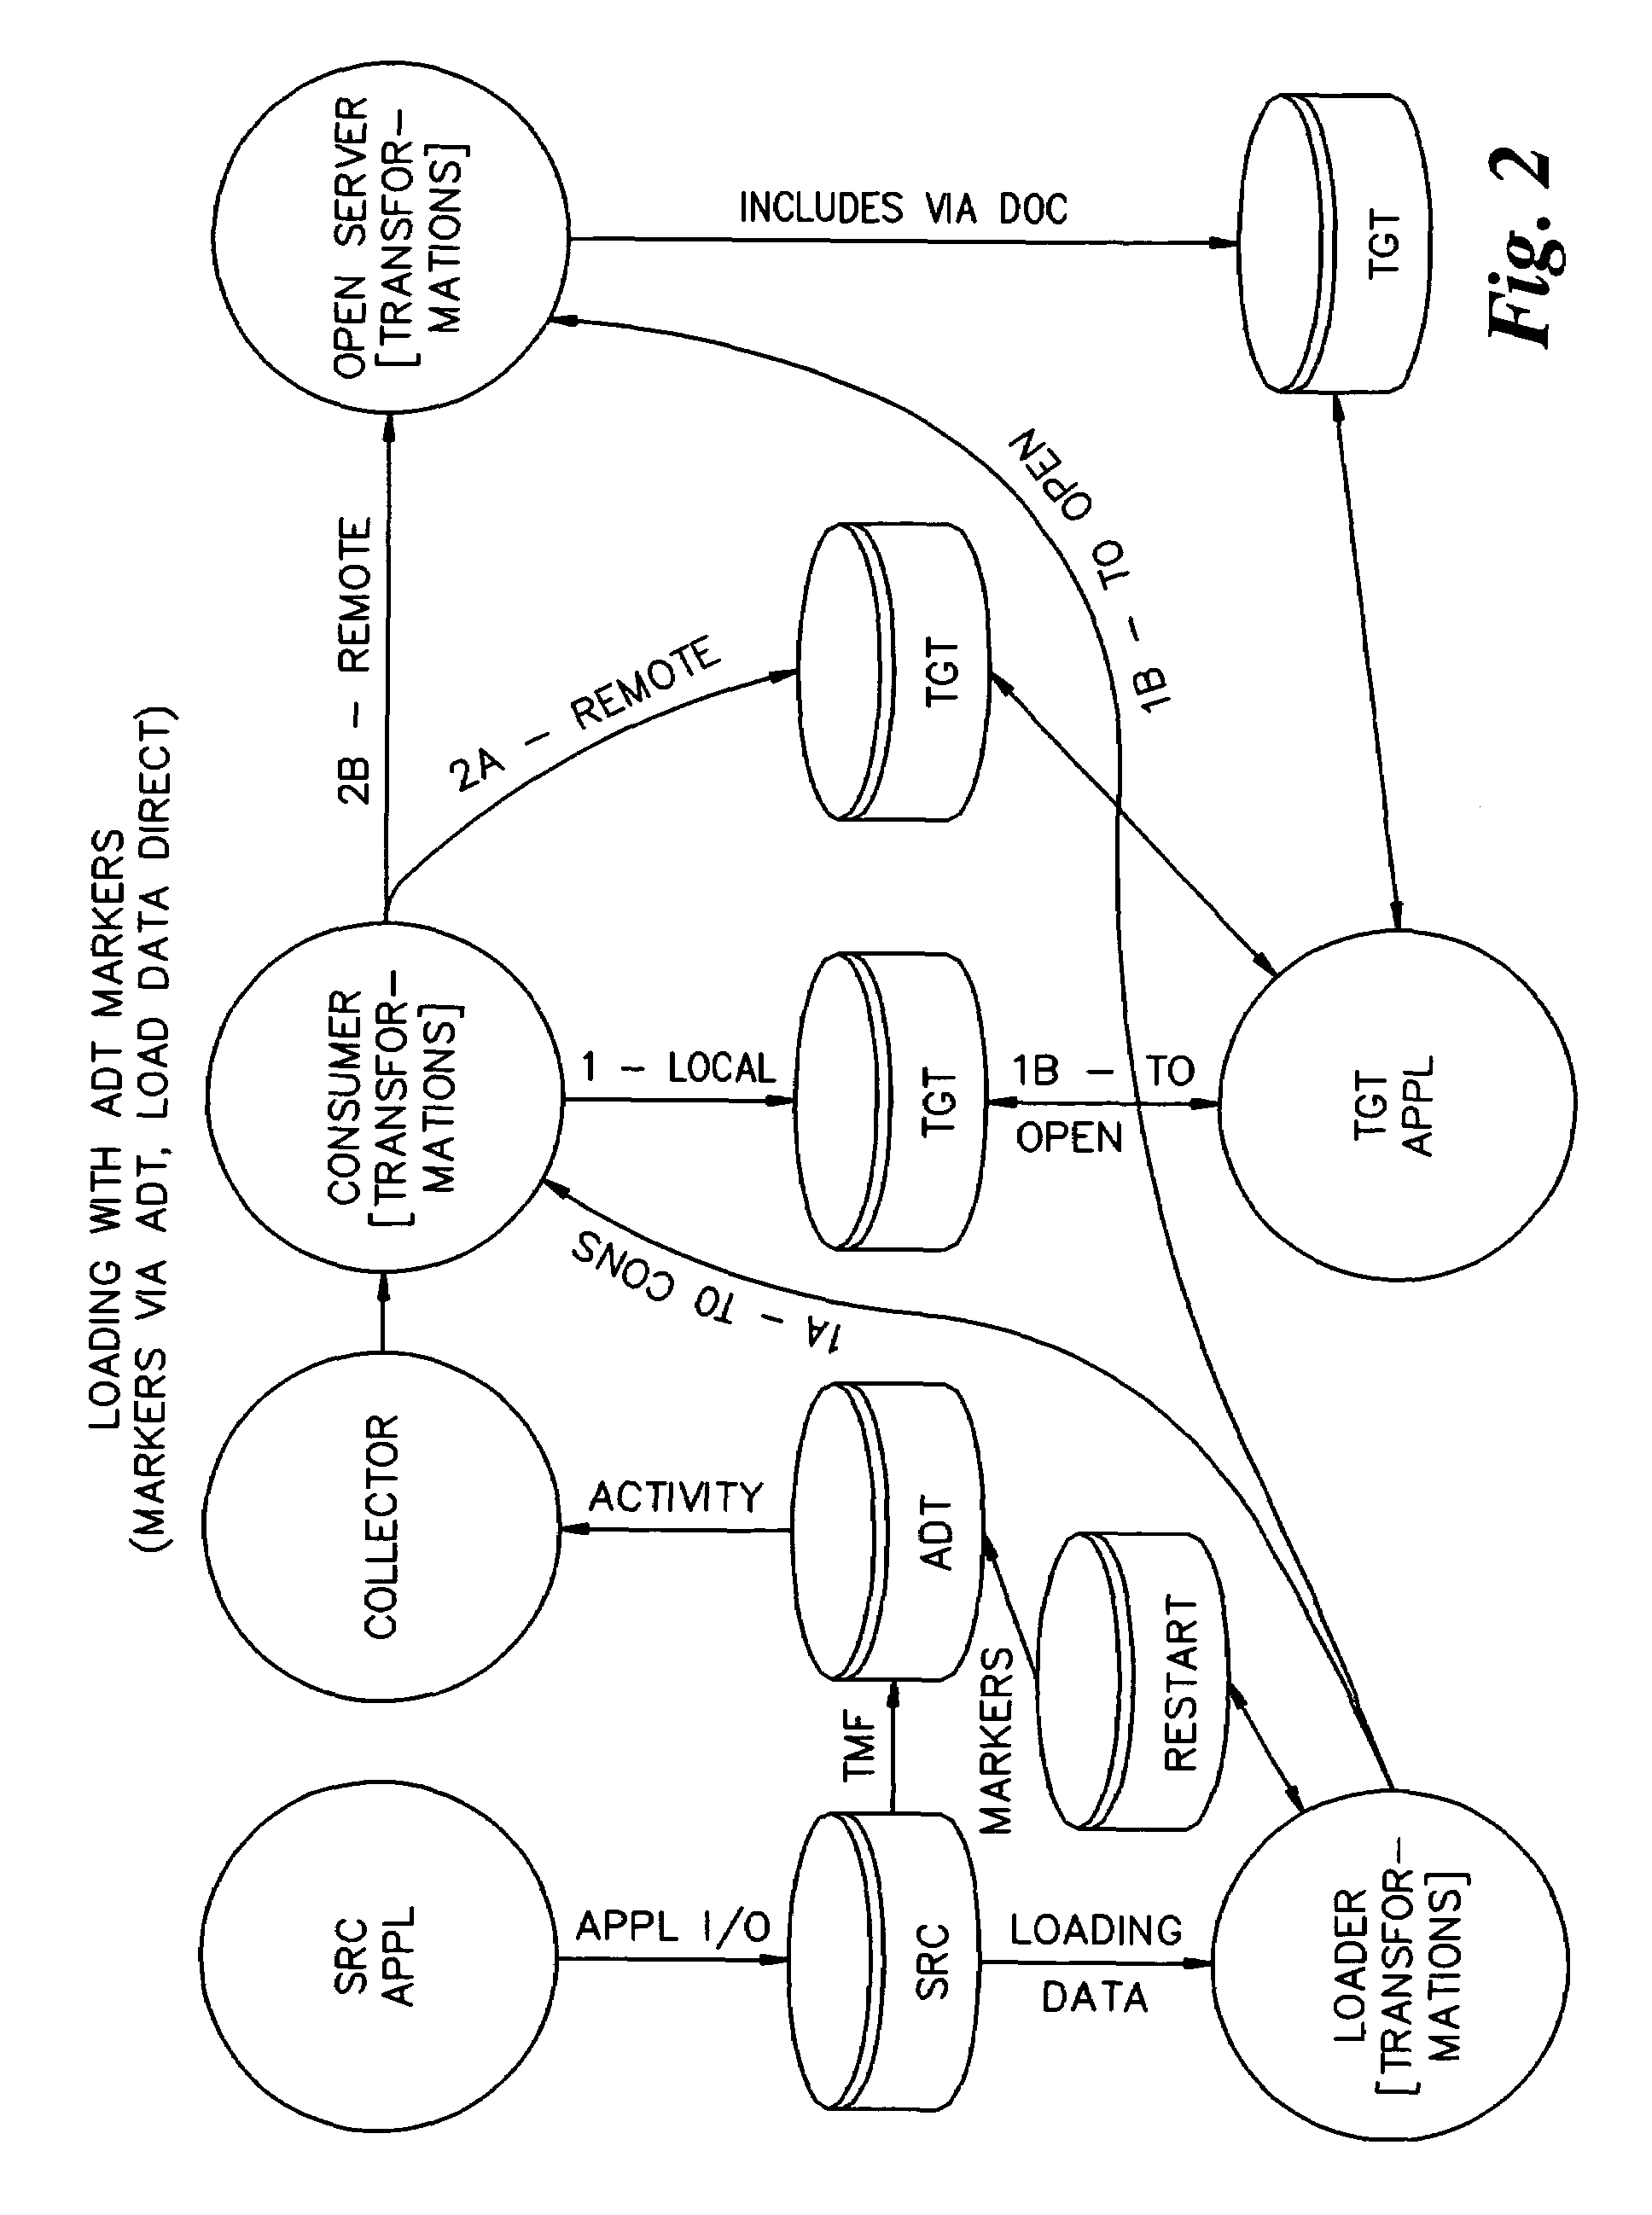 Synchronization of a target database with a source database during database replication